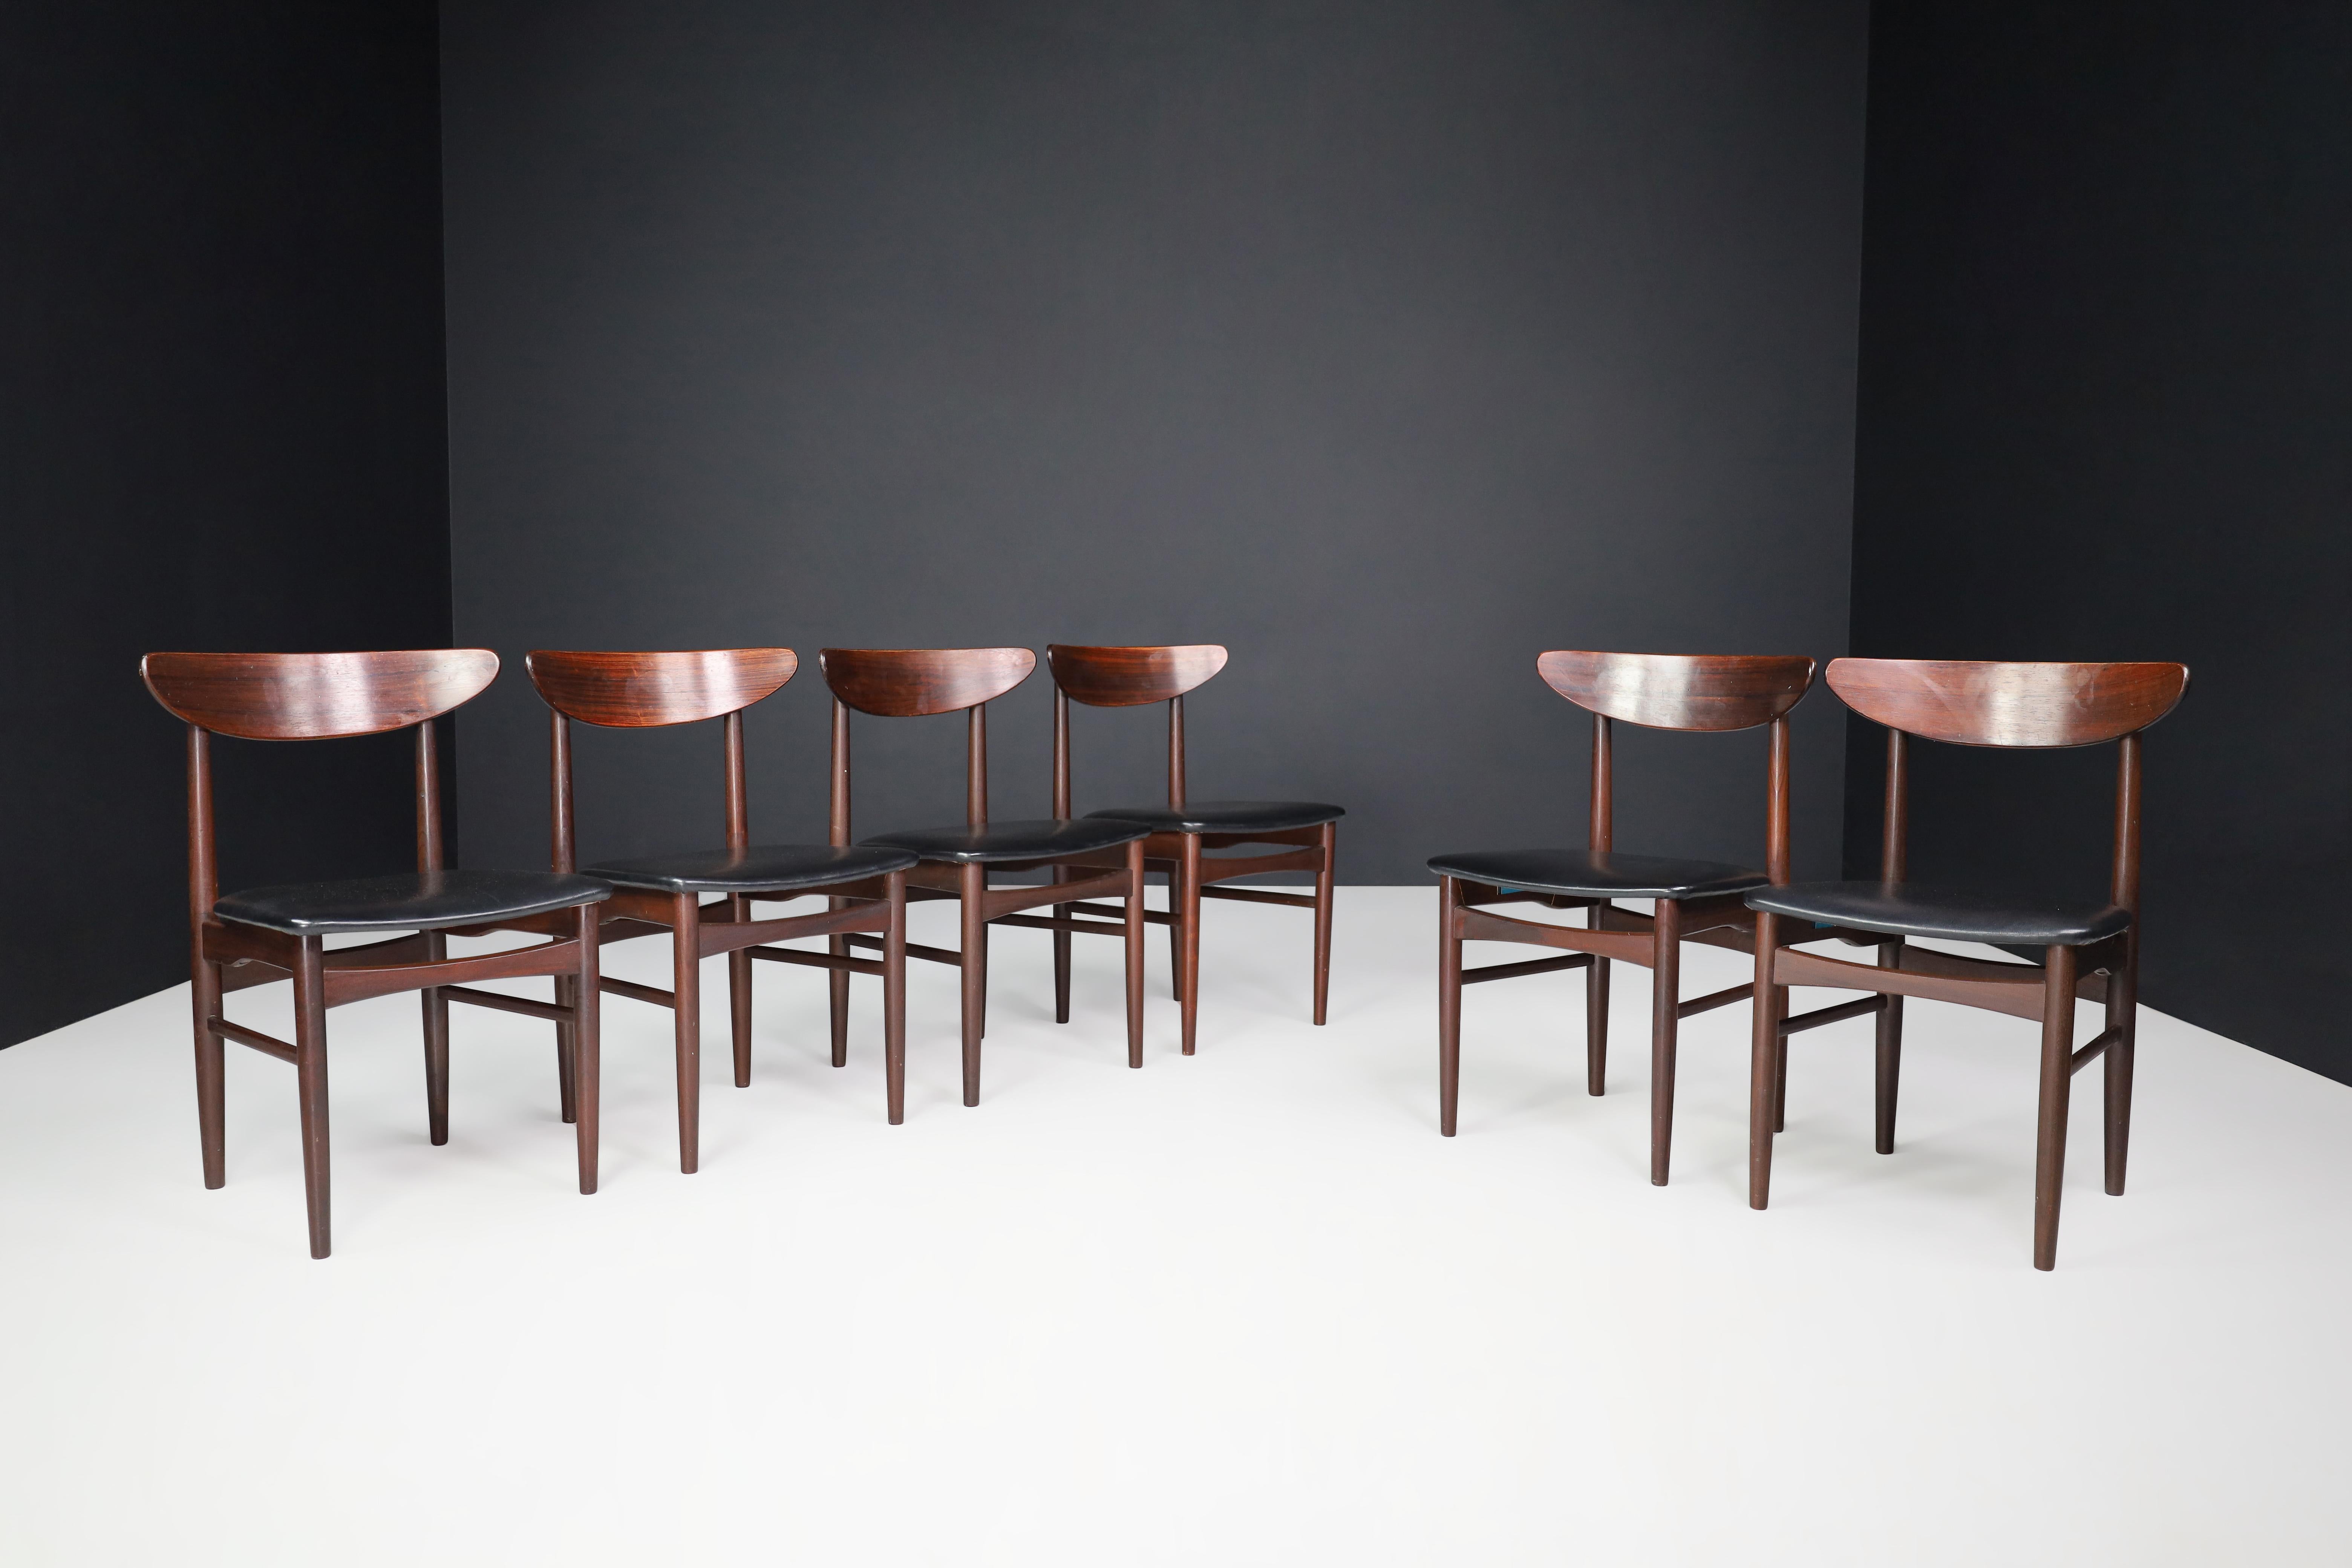 Dyrlund hardwood and black leather dining chairs, Denmark 1960s.

A set of six Danish midcentury dining chairs by Dyrlund with hardwood frames and original black leather upholstered seats. They are in excellent original condition. The color of the